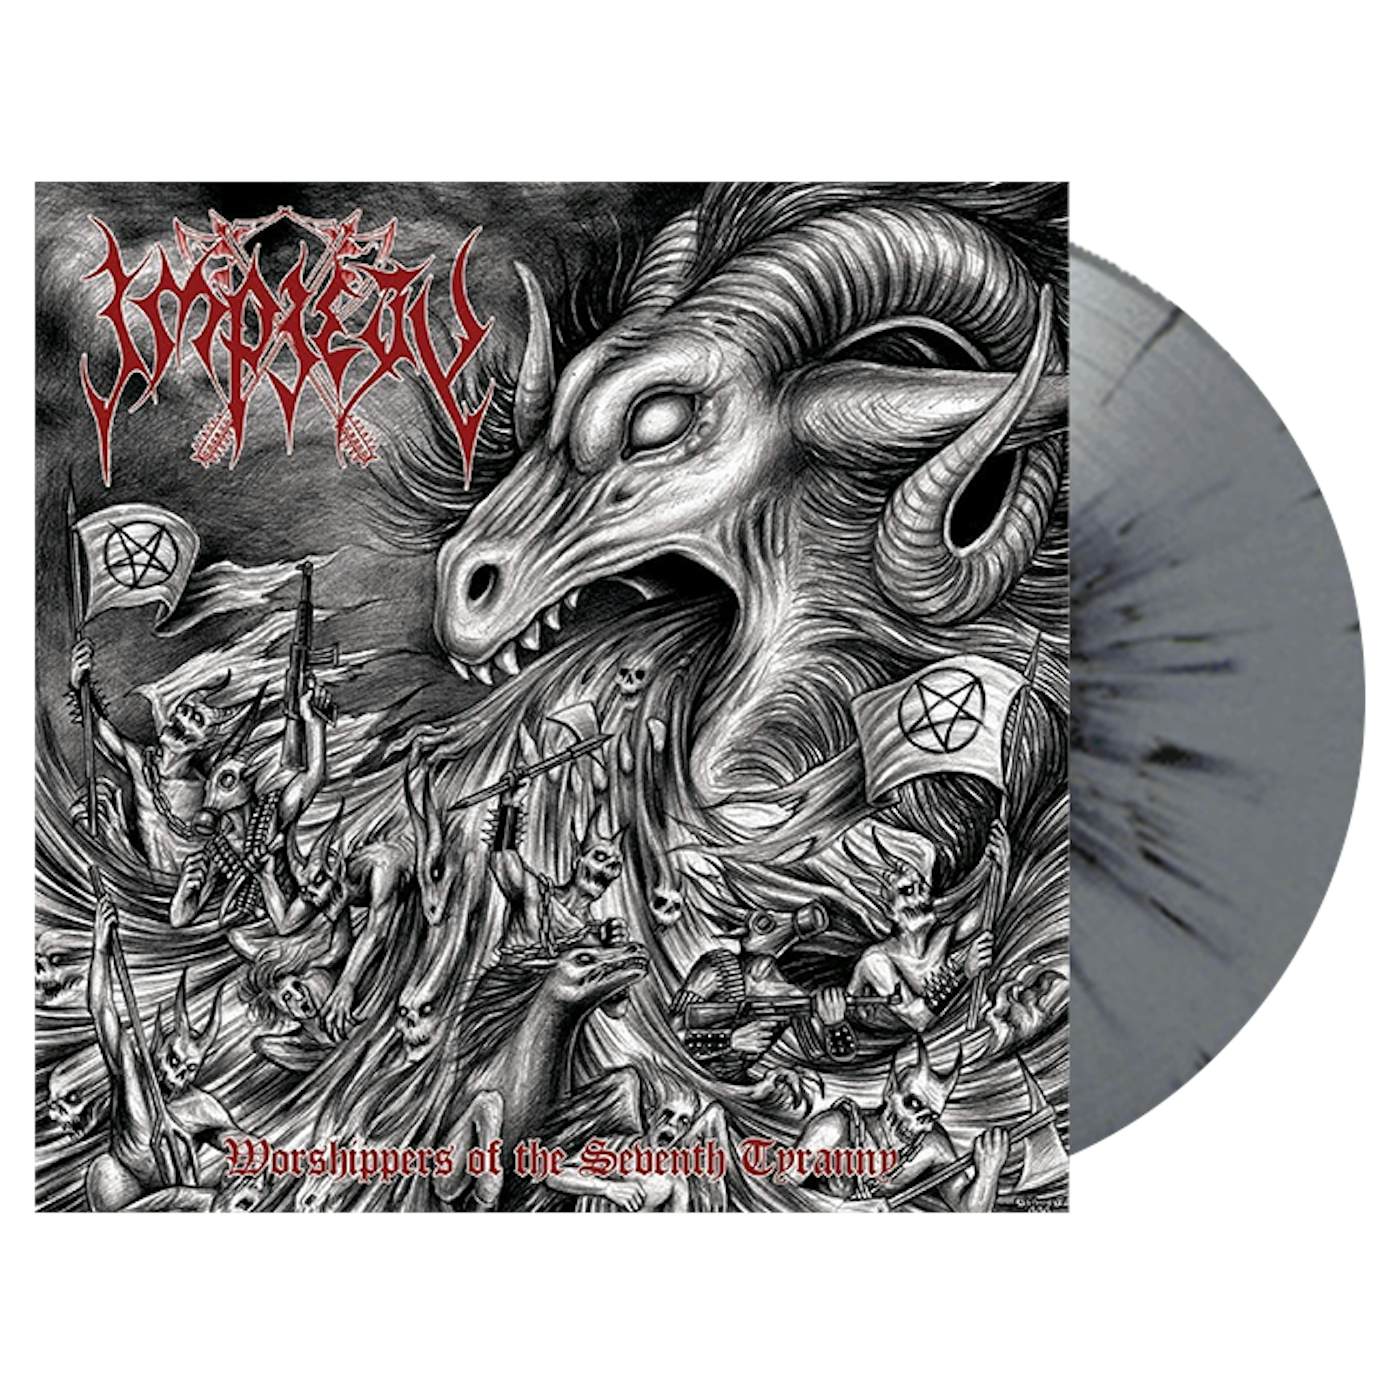 IMPIETY - 'Worshippers Of The Seventh Tyranny' LP (Vinyl)